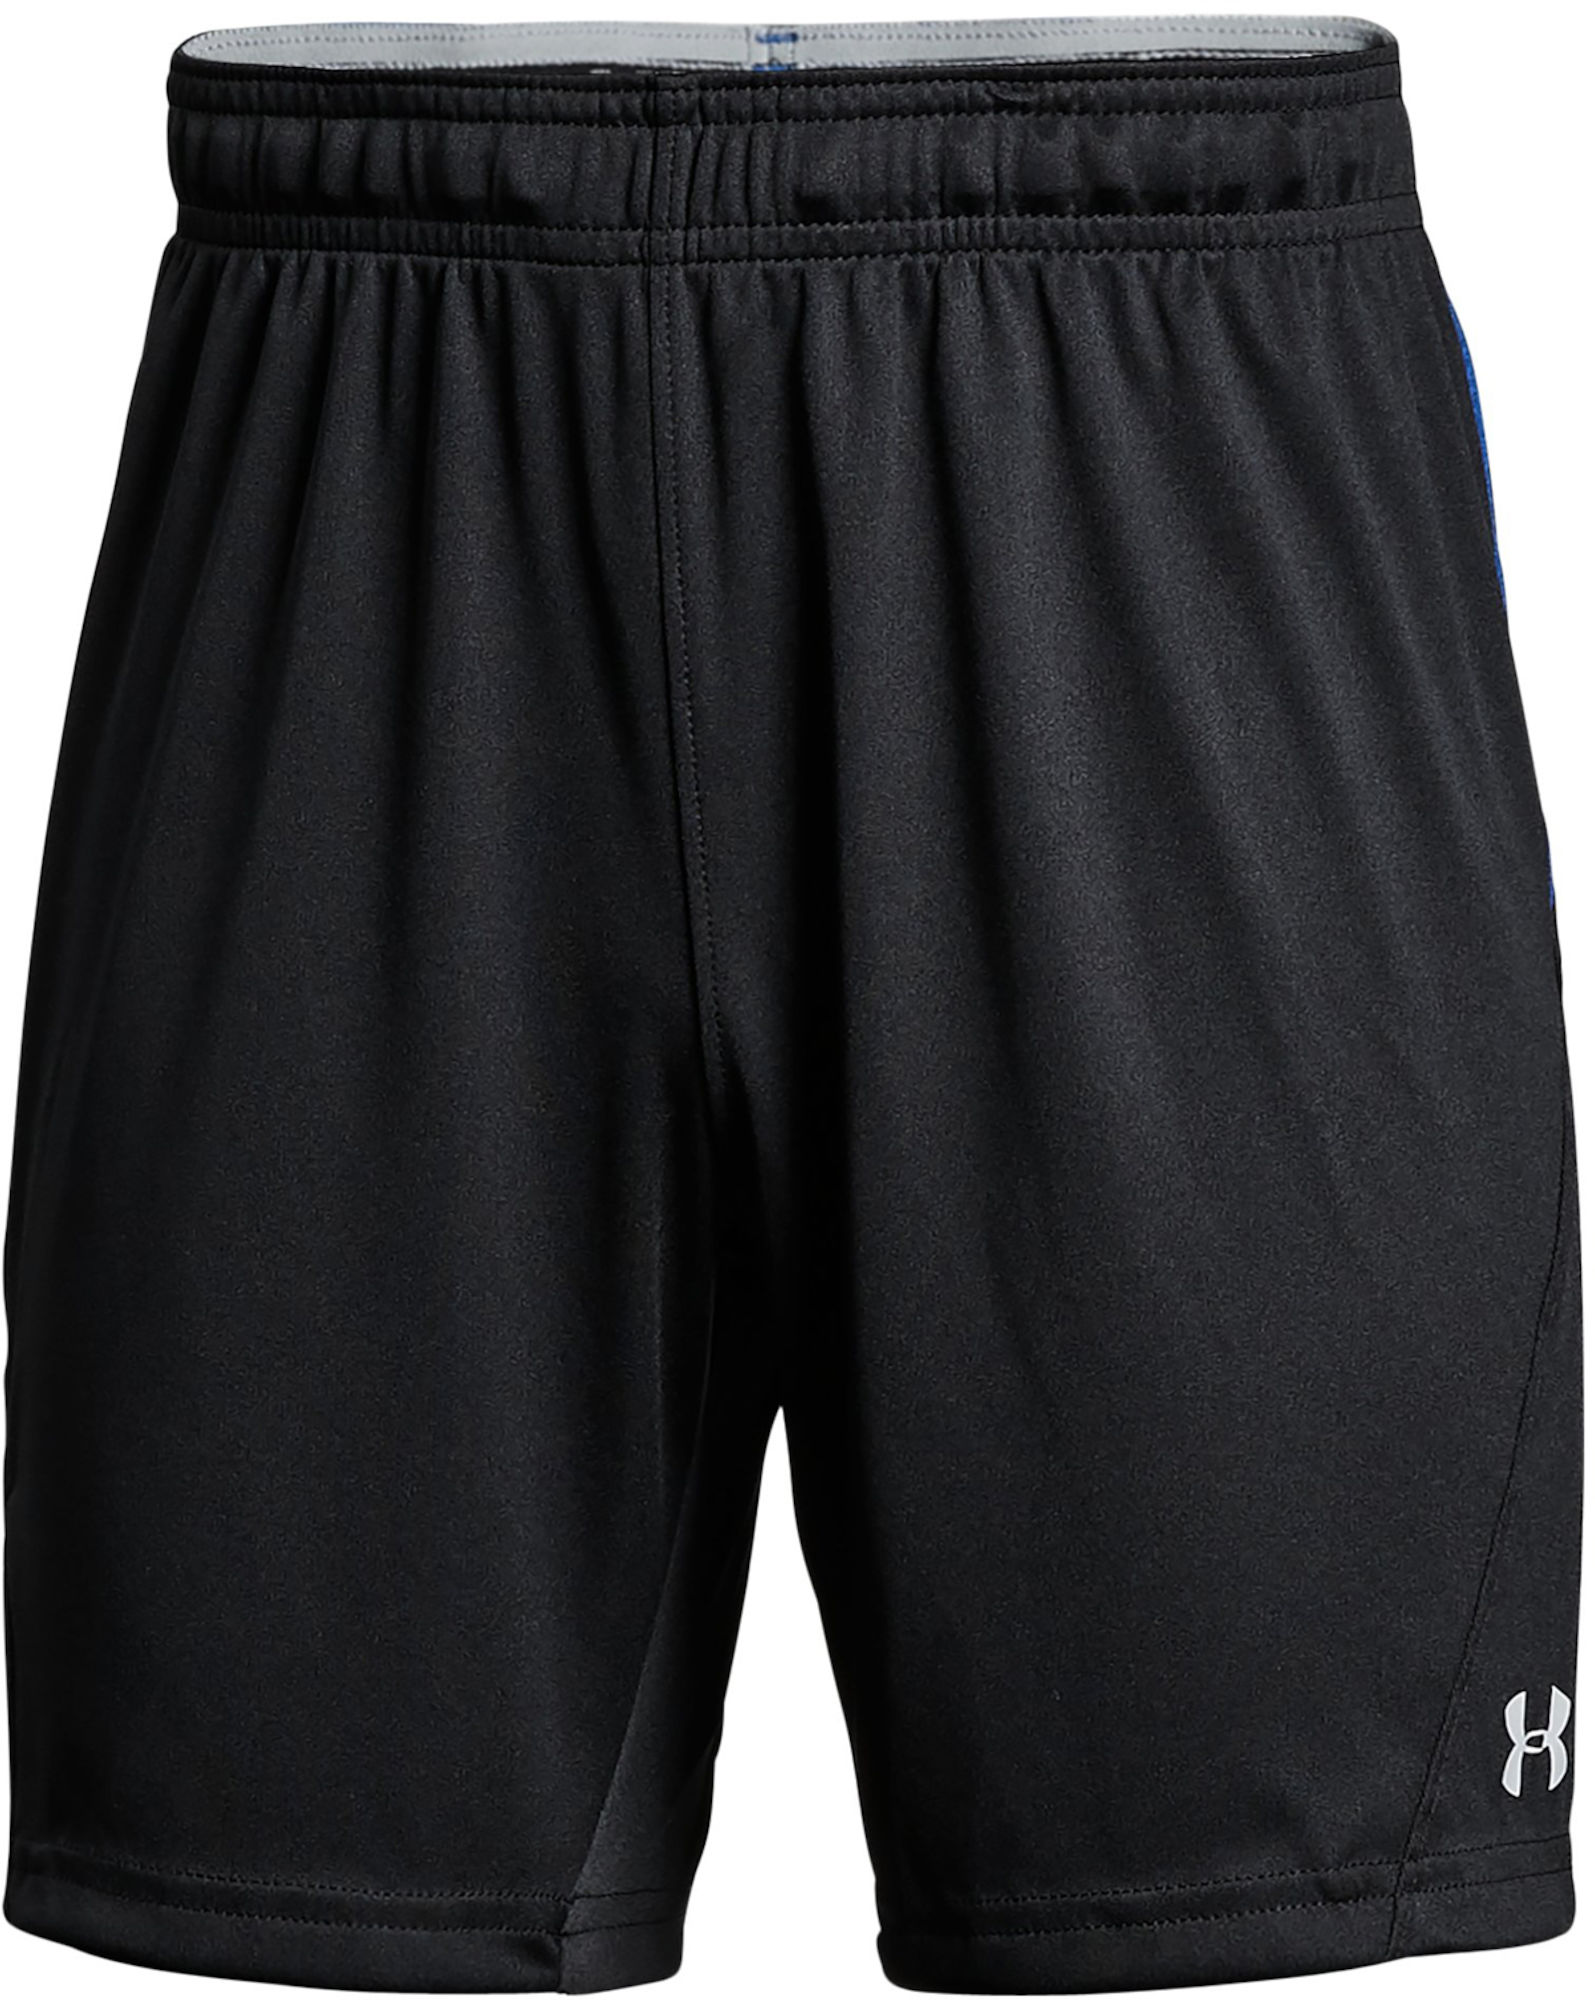 Under Armour Y Challenger II Knit Shorts Black XL